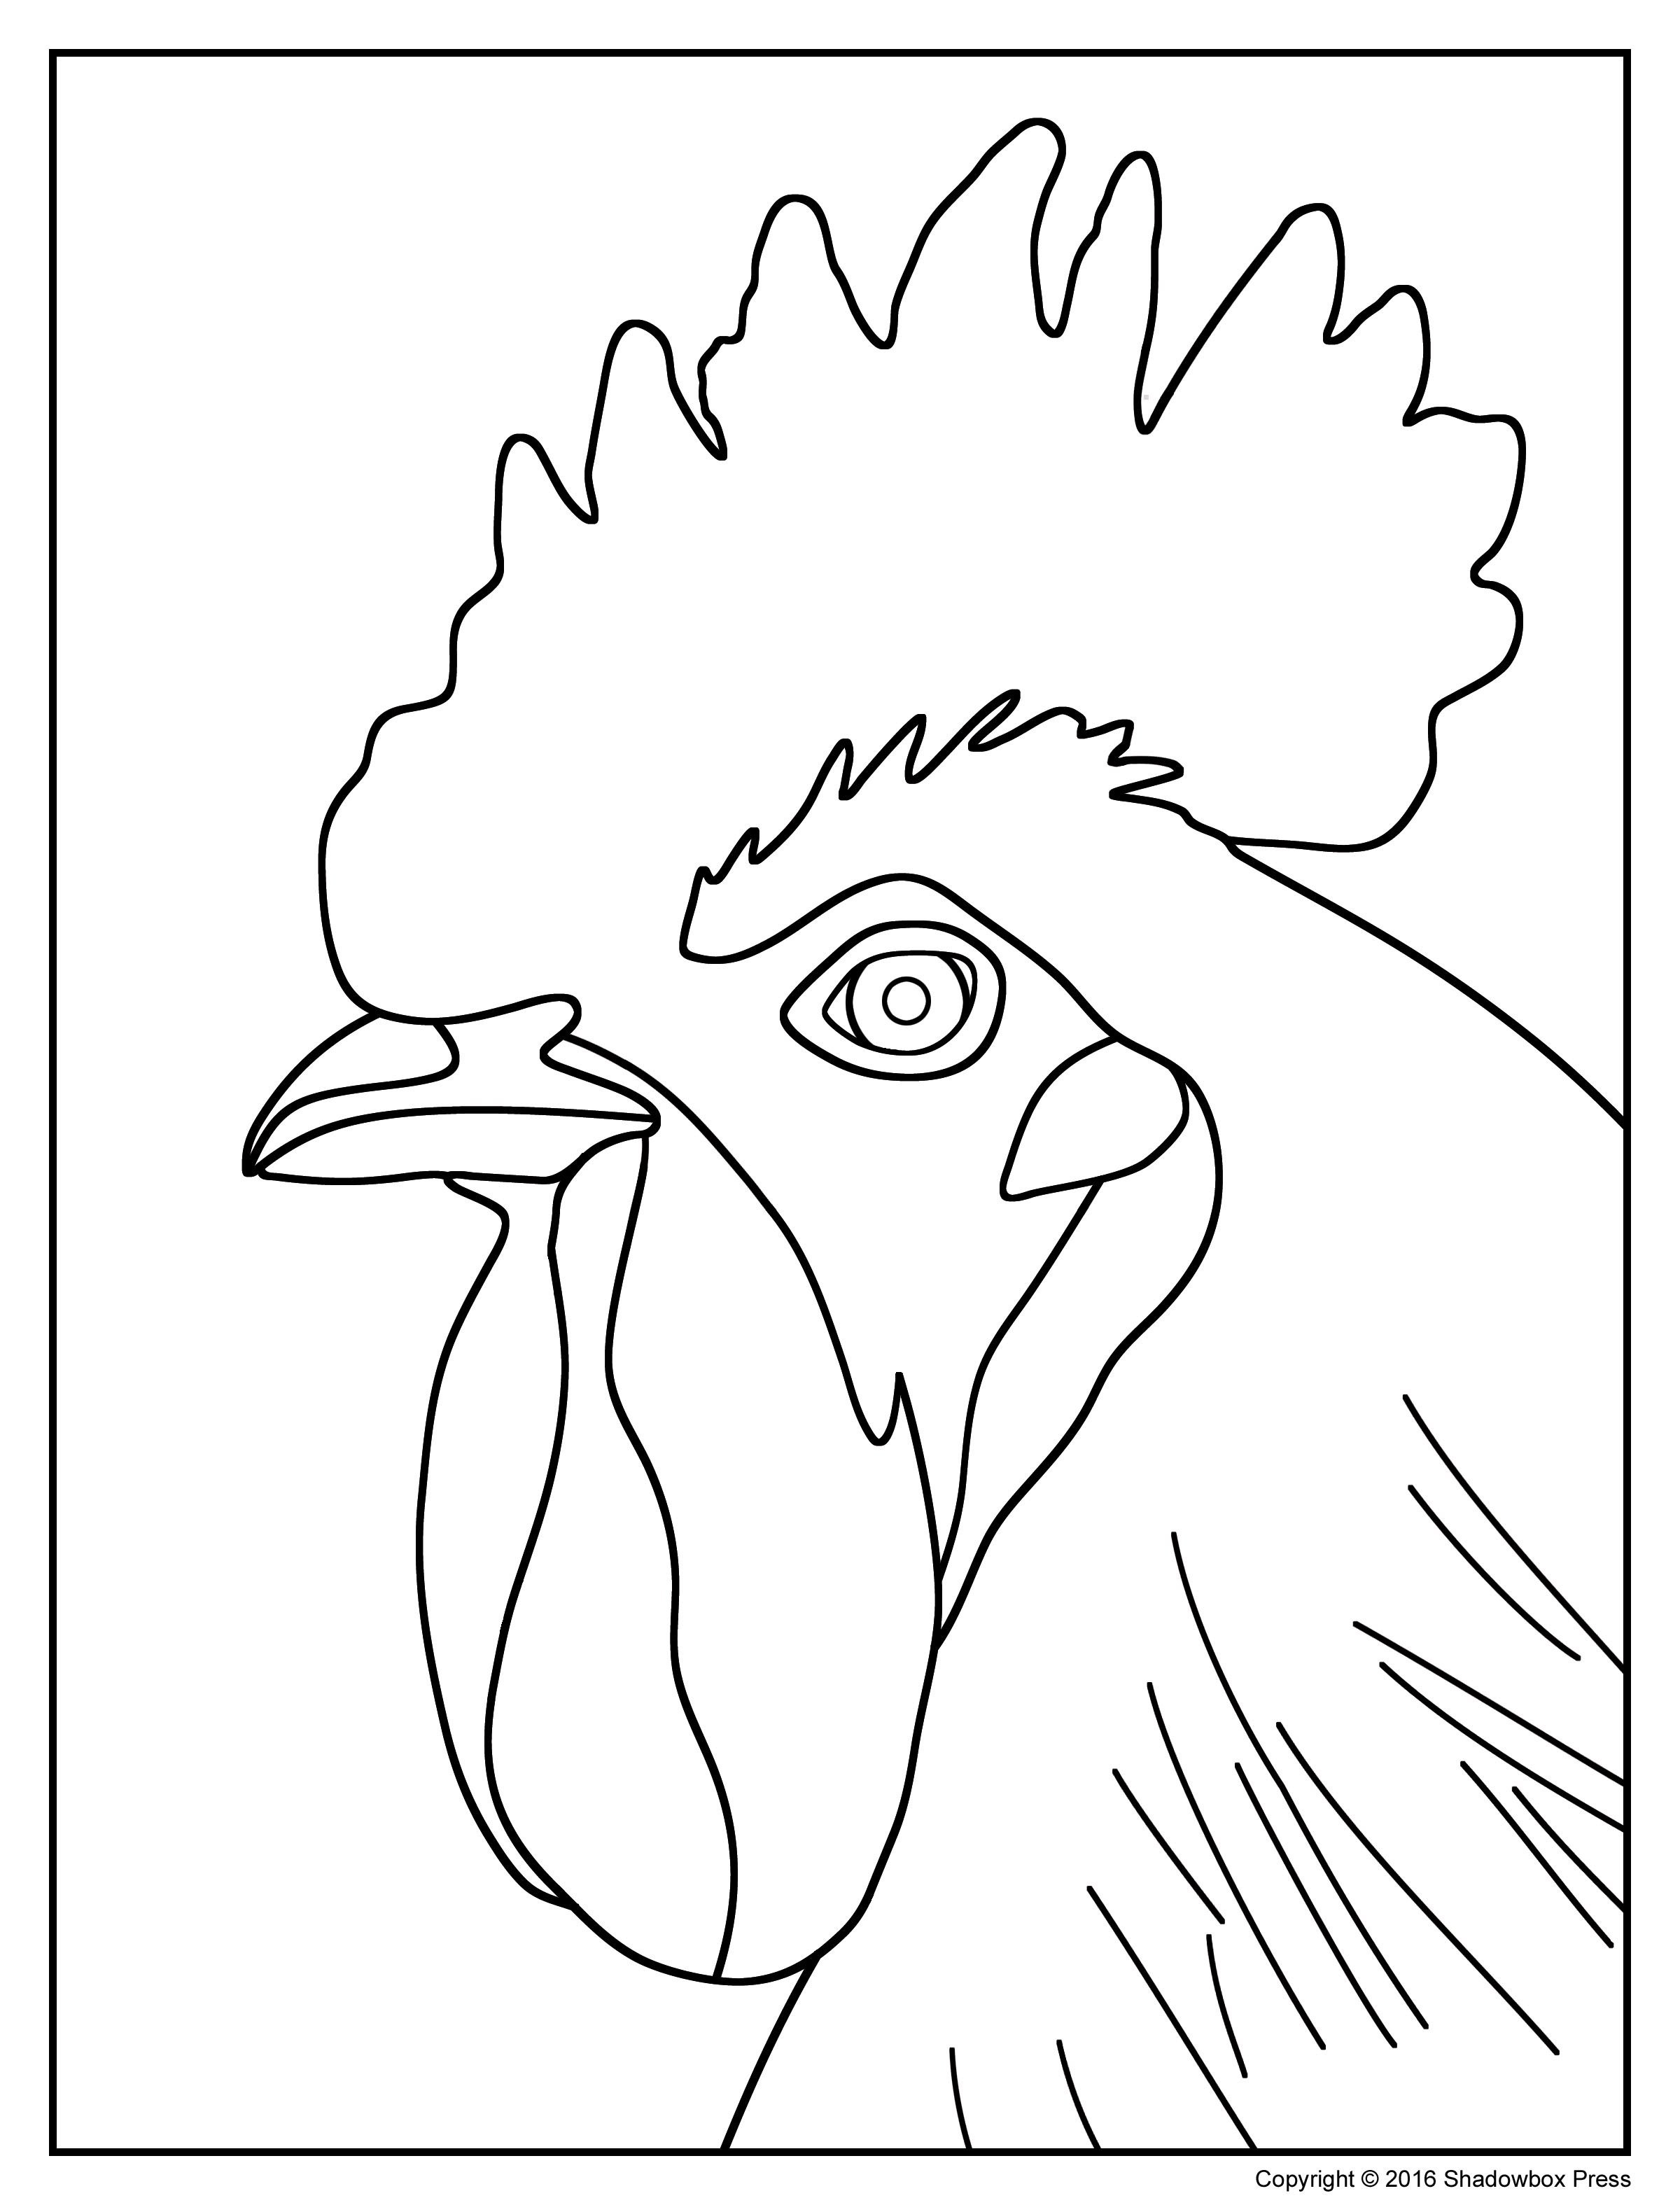 downloadable-coloring-pages-at-getcolorings-free-printable-colorings-pages-to-print-and-color